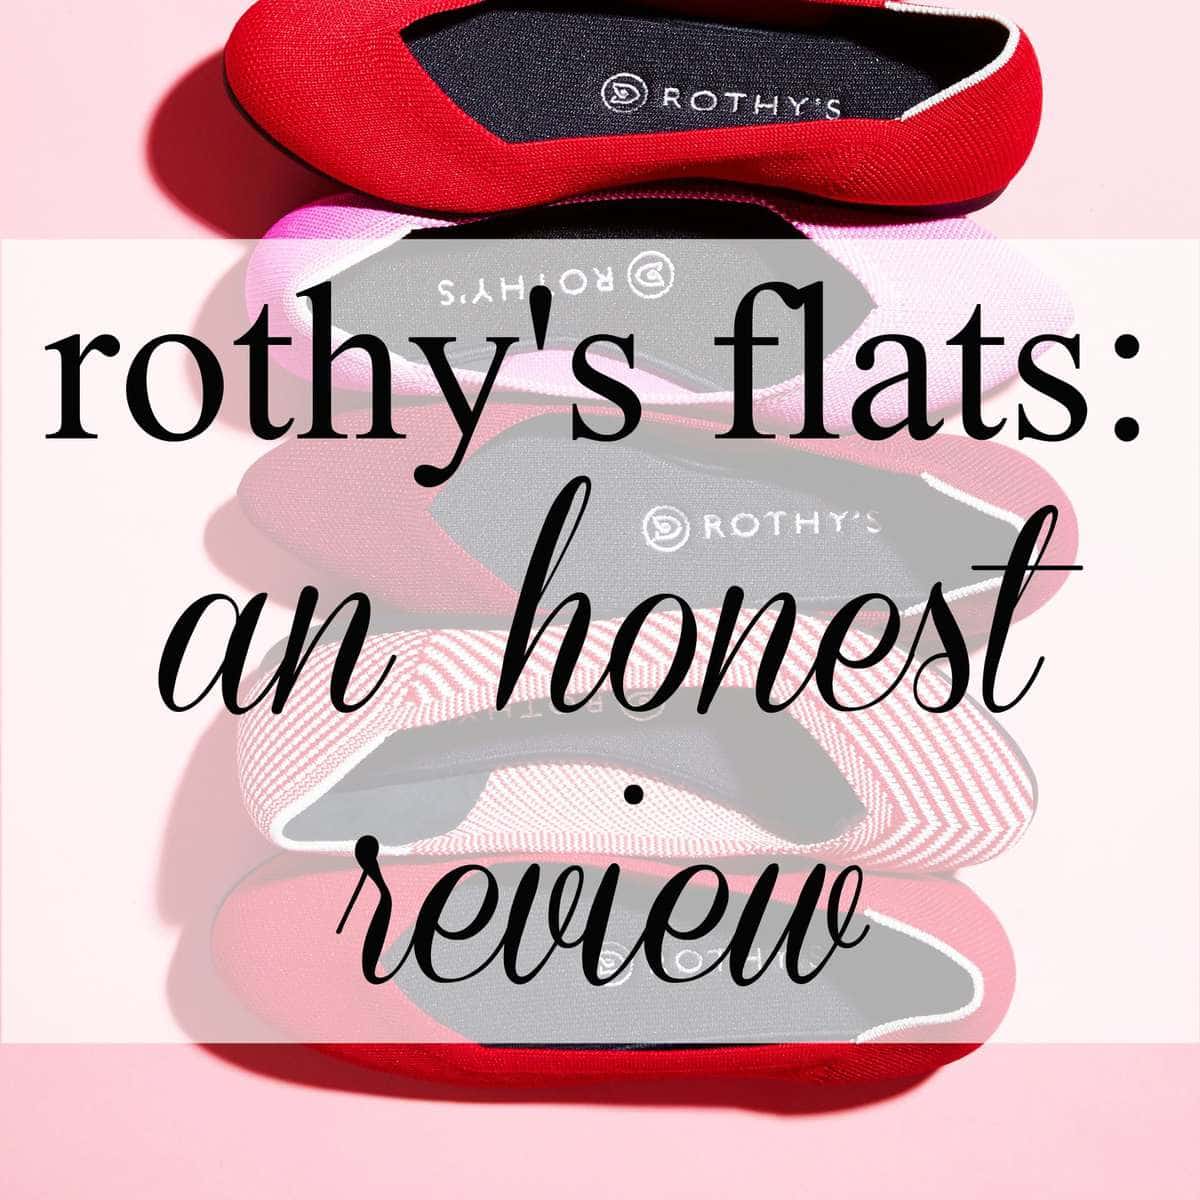 Rothys Flats Review